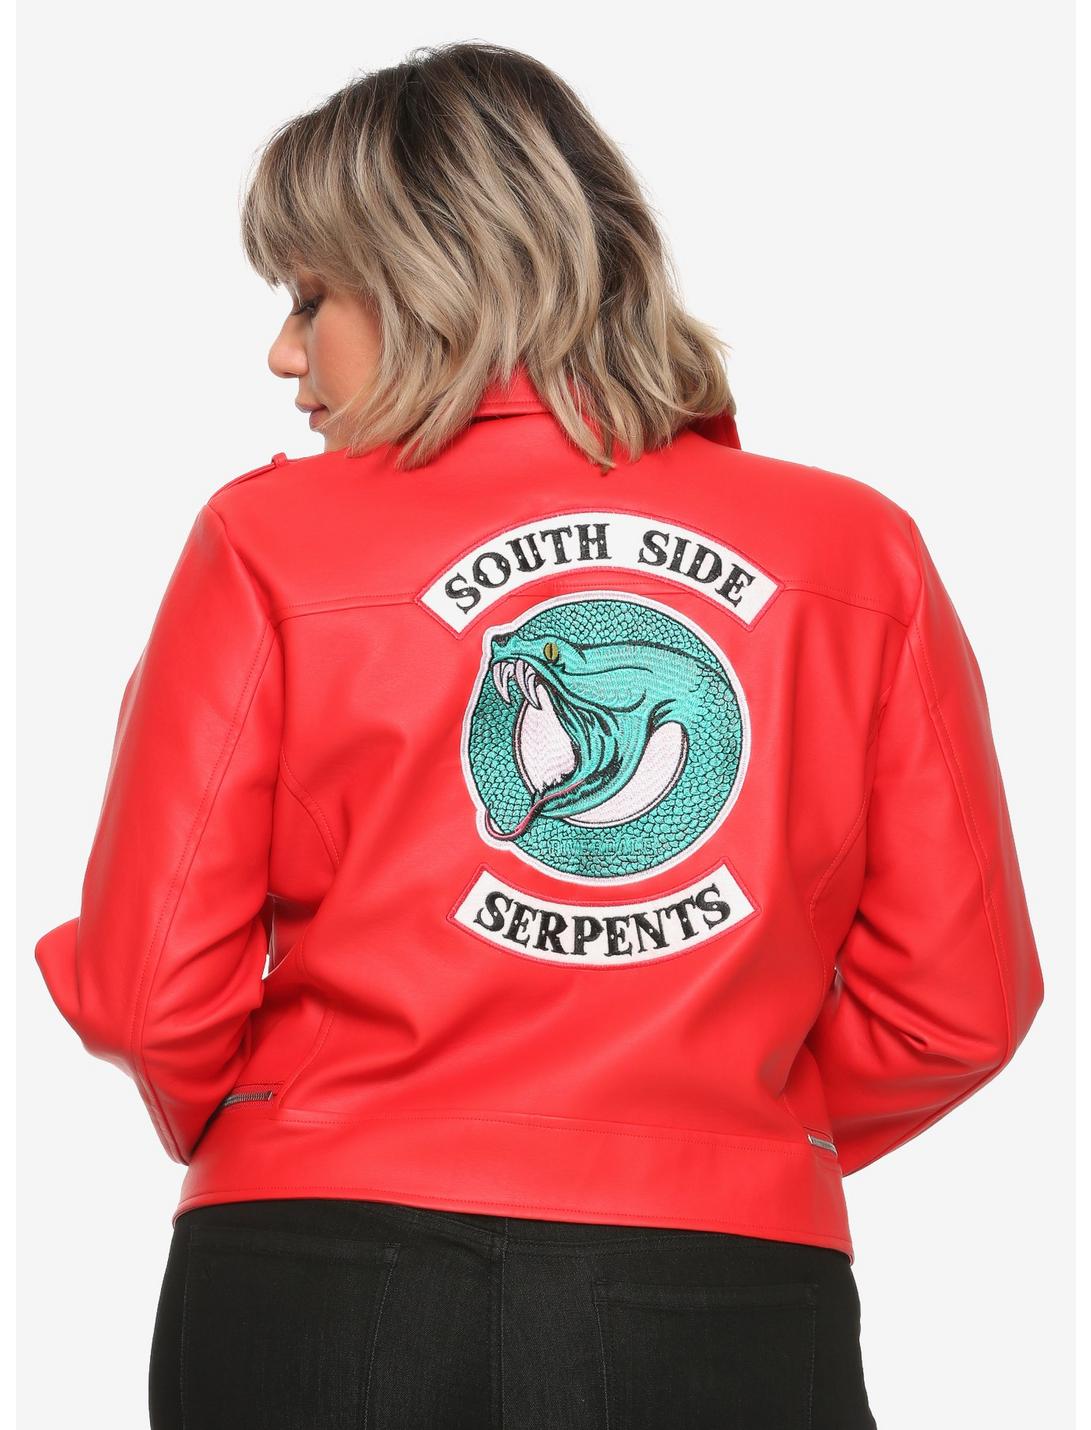 Riverdale Cheryl Southside Serpents Faux Leather Red Girls Jacket Plus Size Hot Topic Exclusive, RED, hi-res